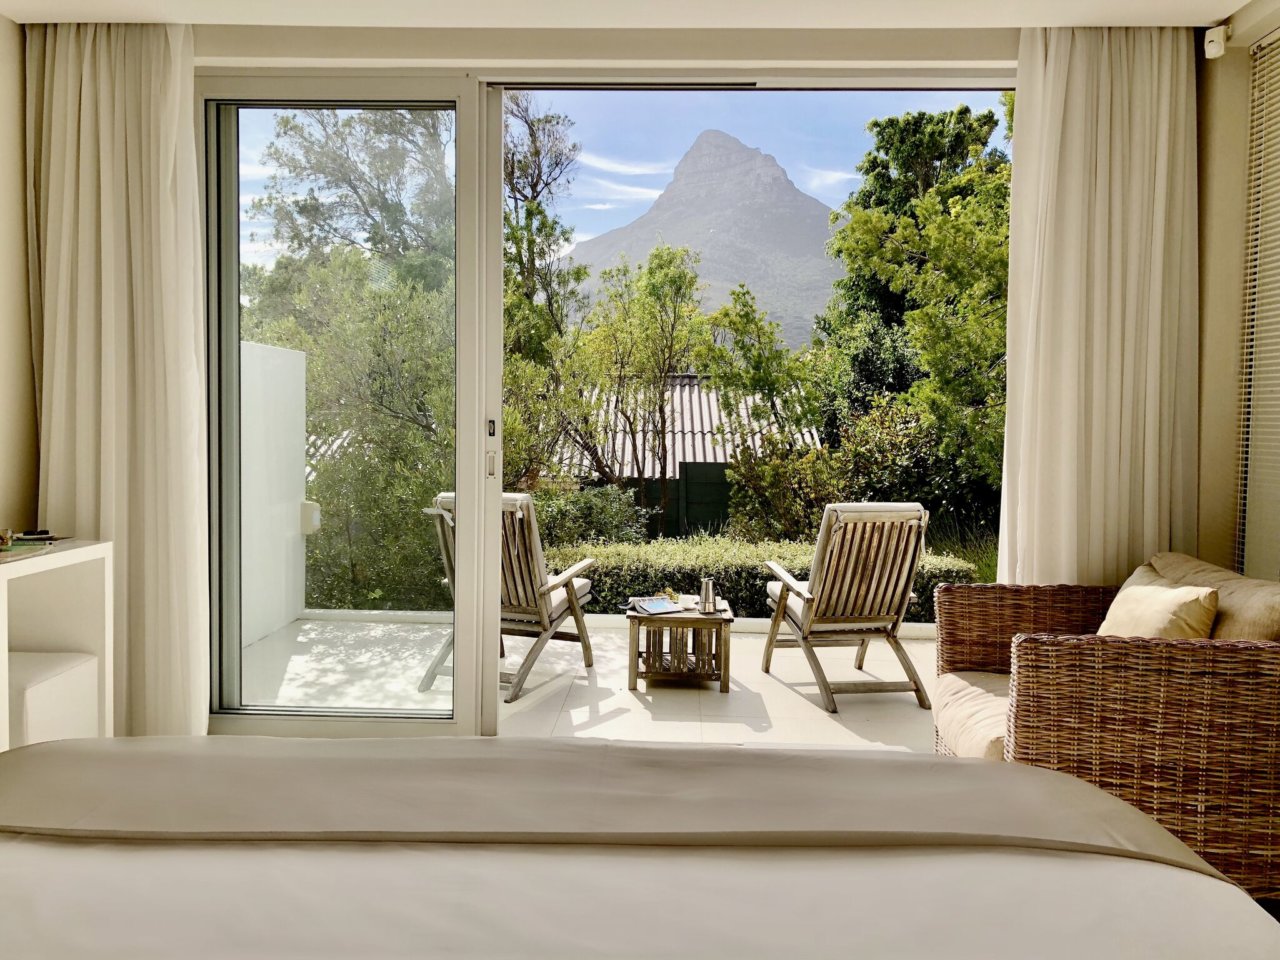 Photo 32 of Aqua Penthouse accommodation in Camps Bay, Cape Town with 2 bedrooms and 2 bathrooms